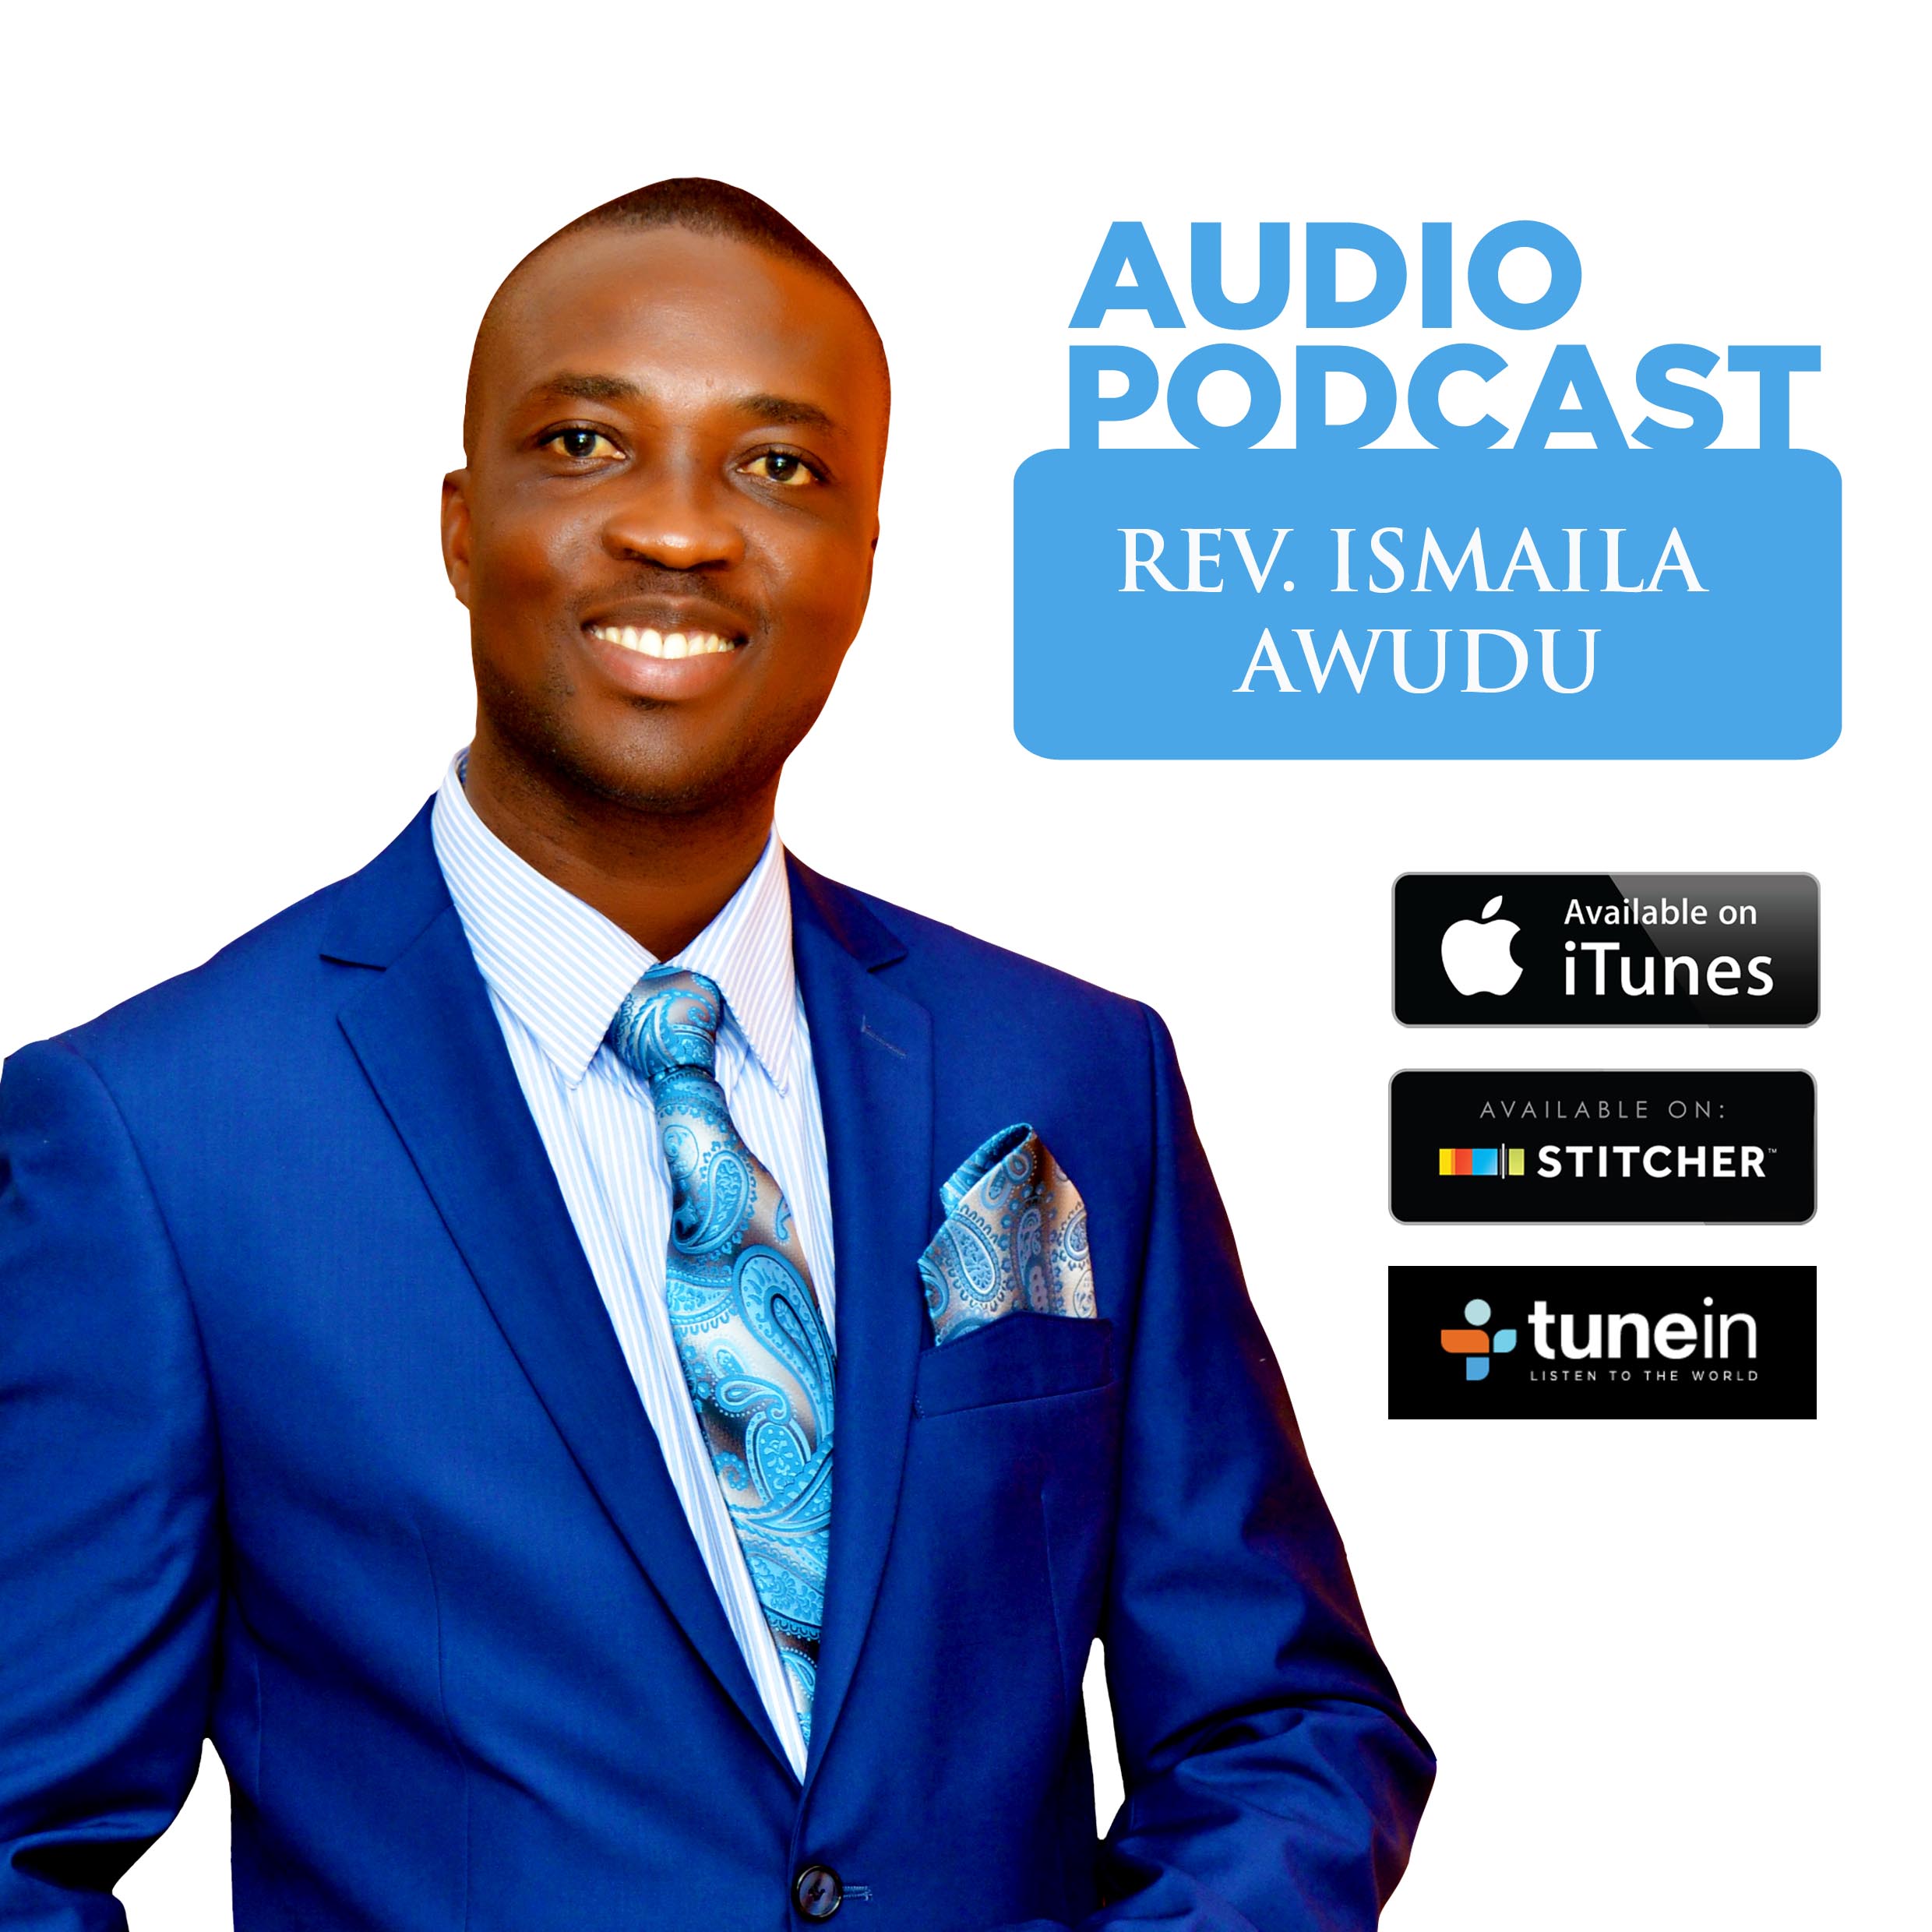 LISTEN TO REV ISMAILA ON PODCAST